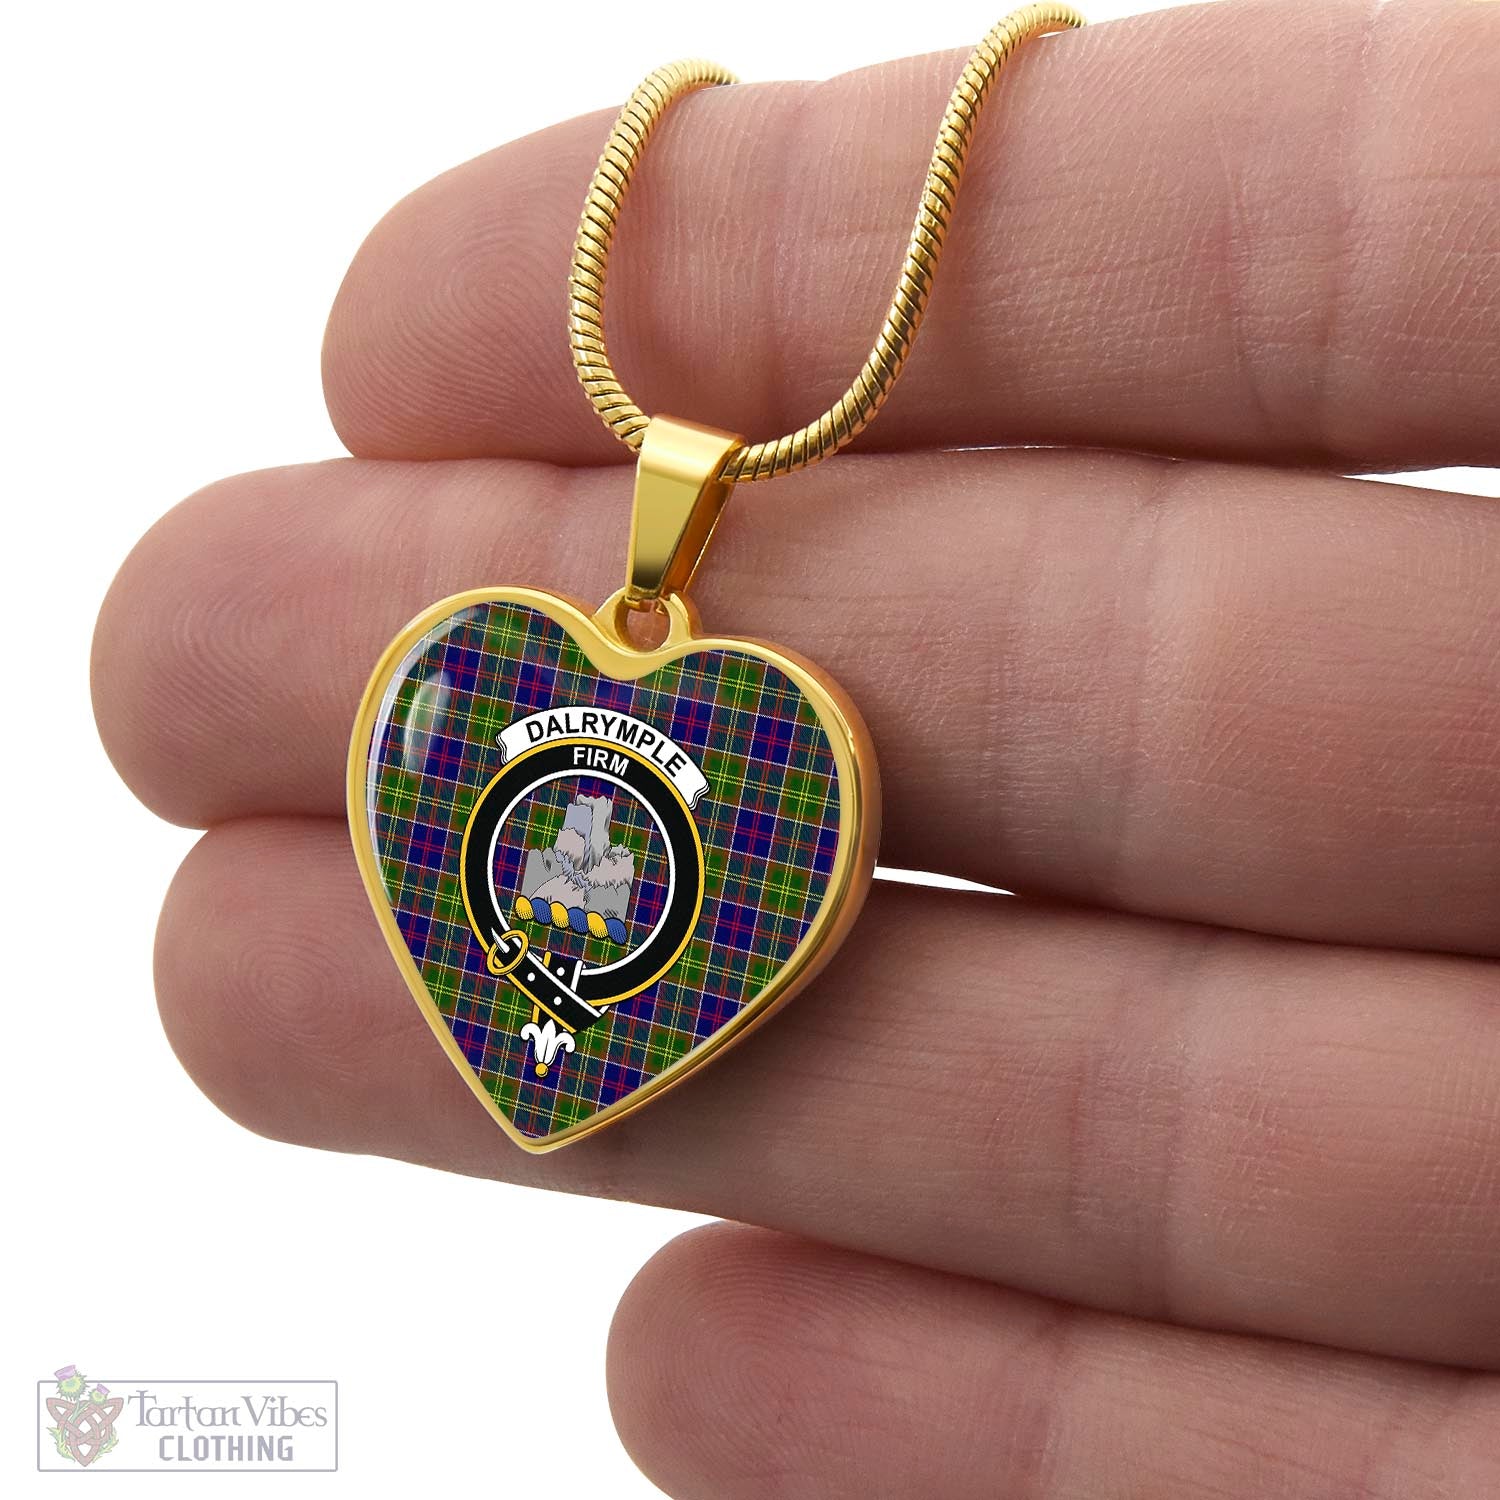 Tartan Vibes Clothing Dalrymple Tartan Heart Necklace with Family Crest